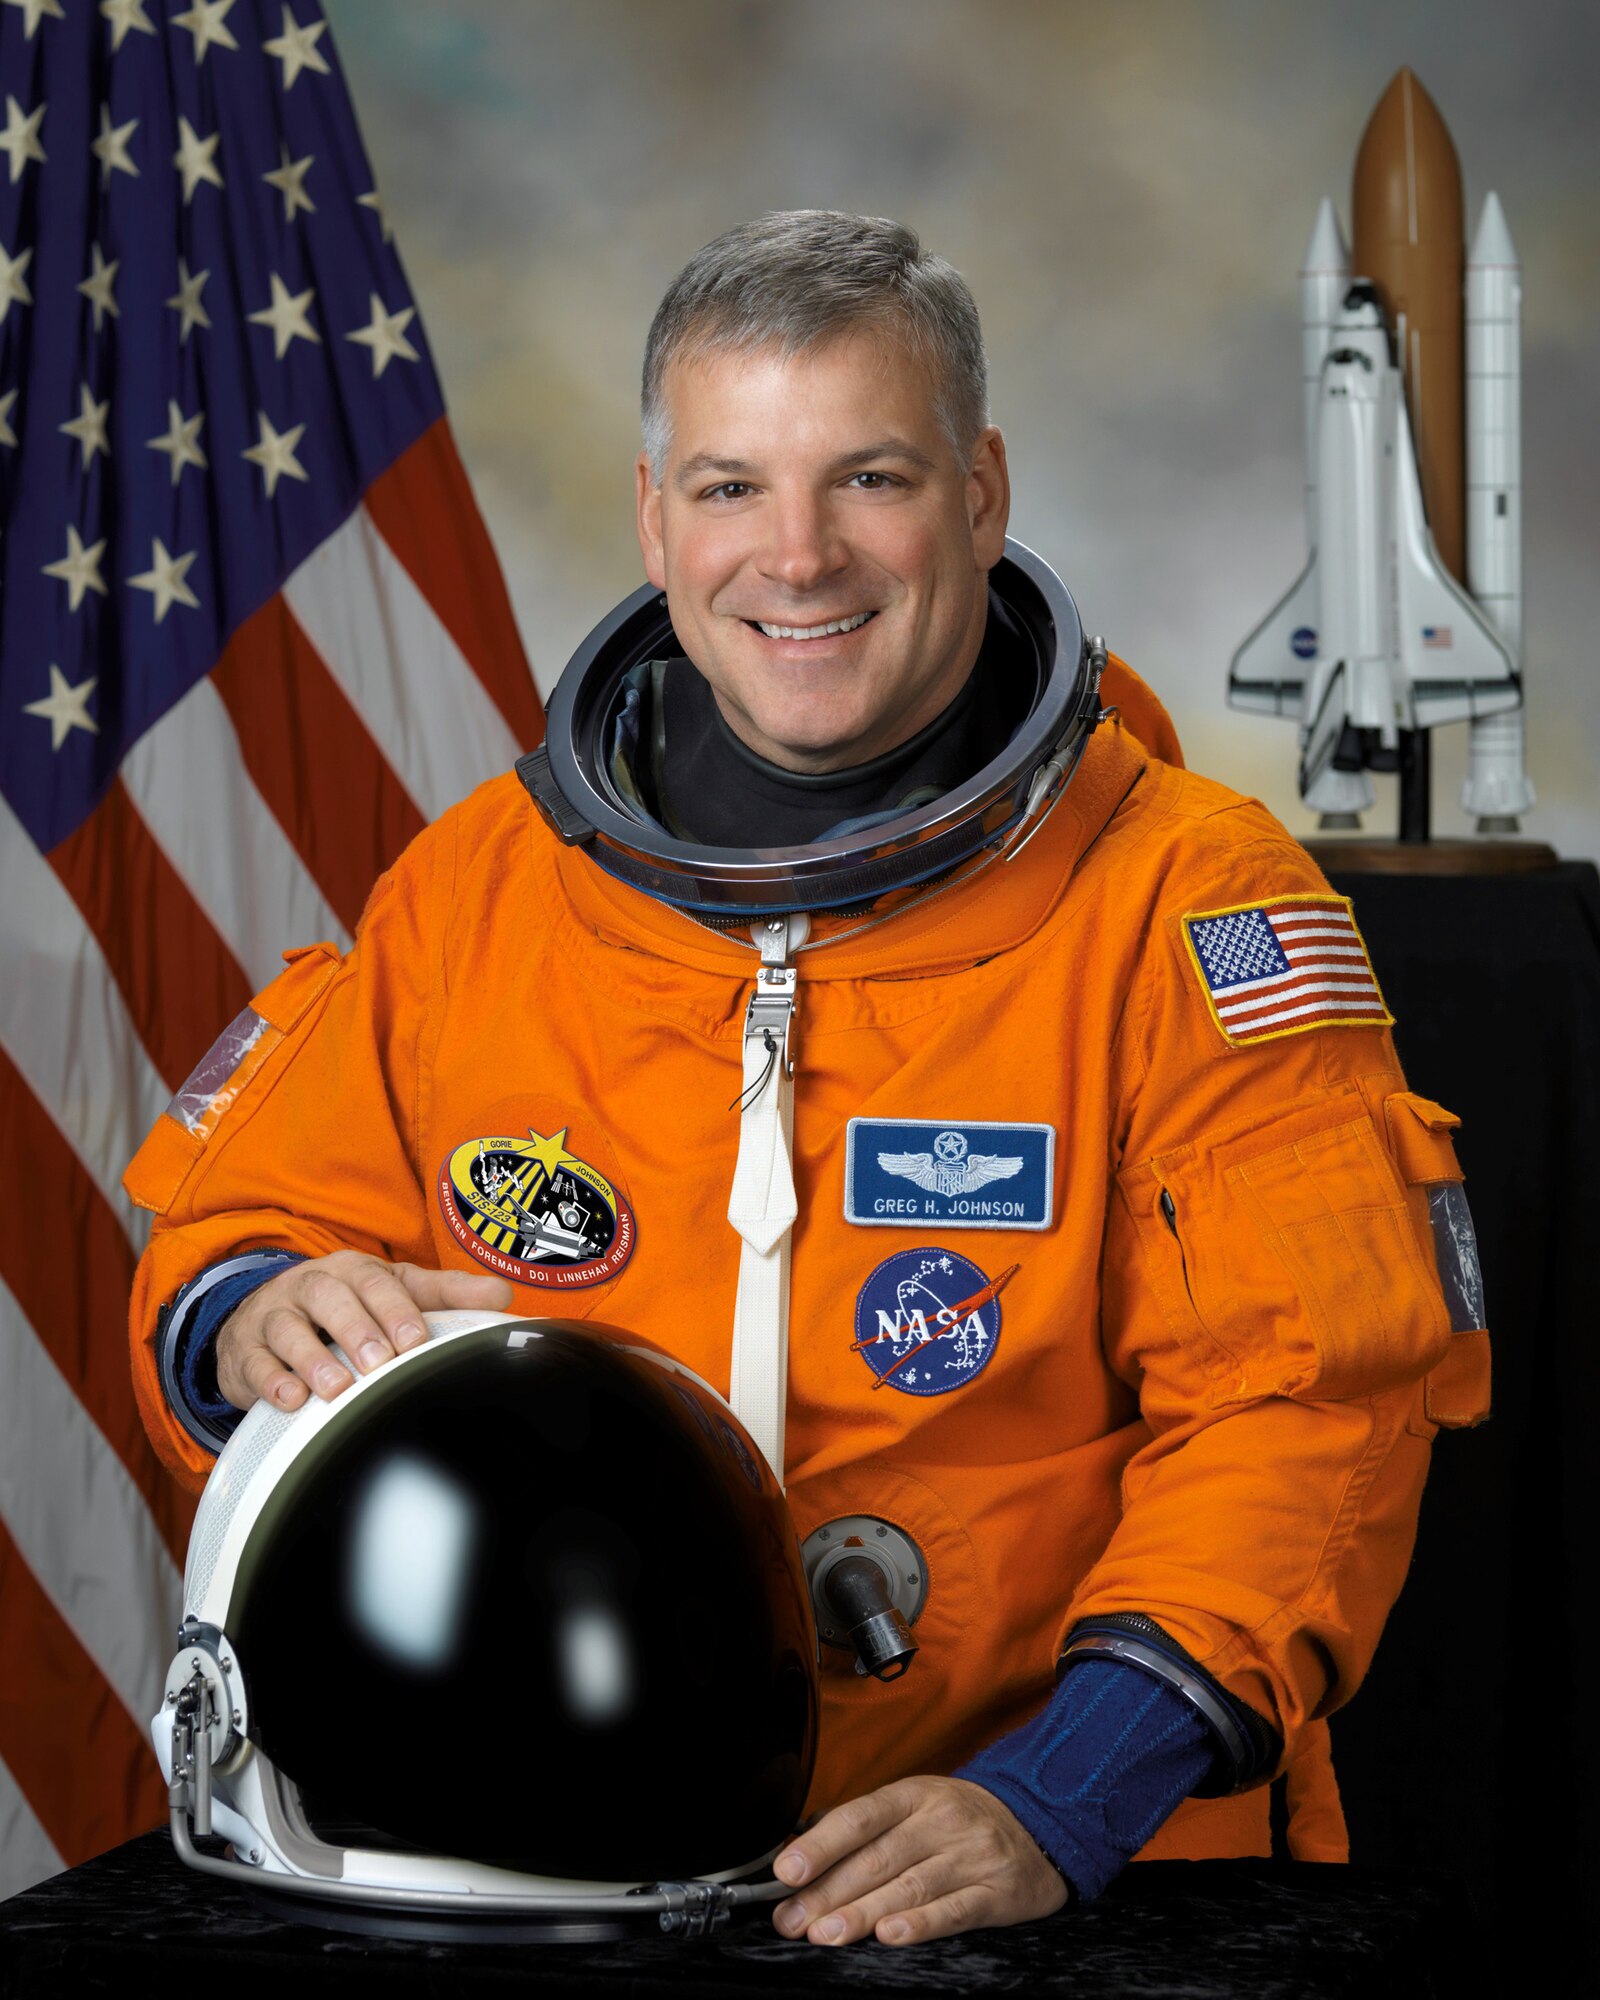 Retired Col. Greg Johnson has been selected as the pilot for Space Shuttle Discovery's upcoming mission, STS-134, which will deliver the alpha magnetic spectrometer to the International Space Station. Colonel Johnson is a 1984 graduate of the U.S. Air Force Academy in Colorado Springs, Colo. (NASA photo)